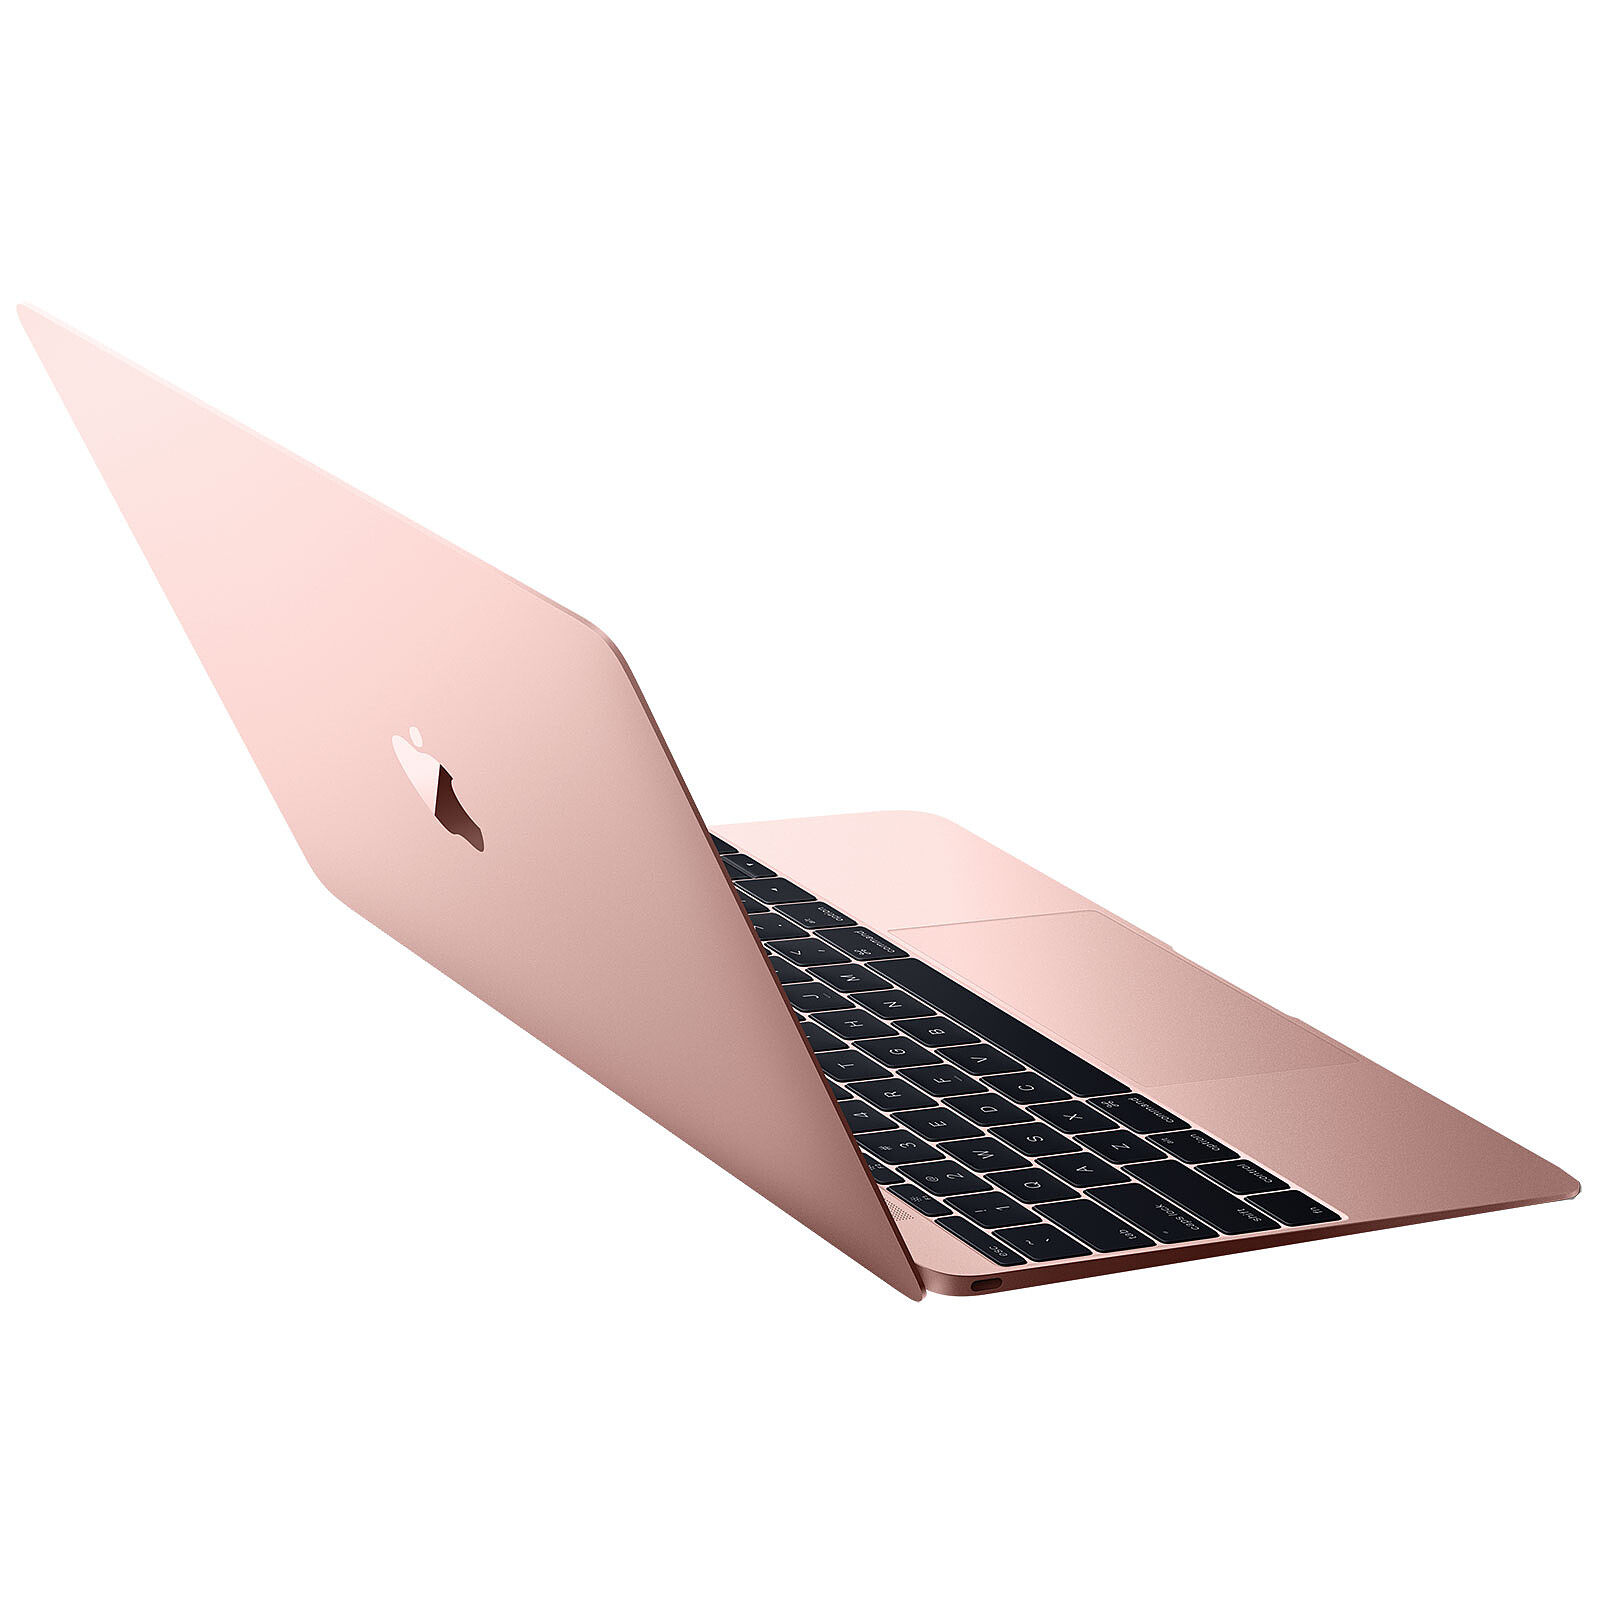 Apple MacBook 12 Or rose (MMGL2FN/A) · Reconditionné - MacBook  reconditionné - LDLC